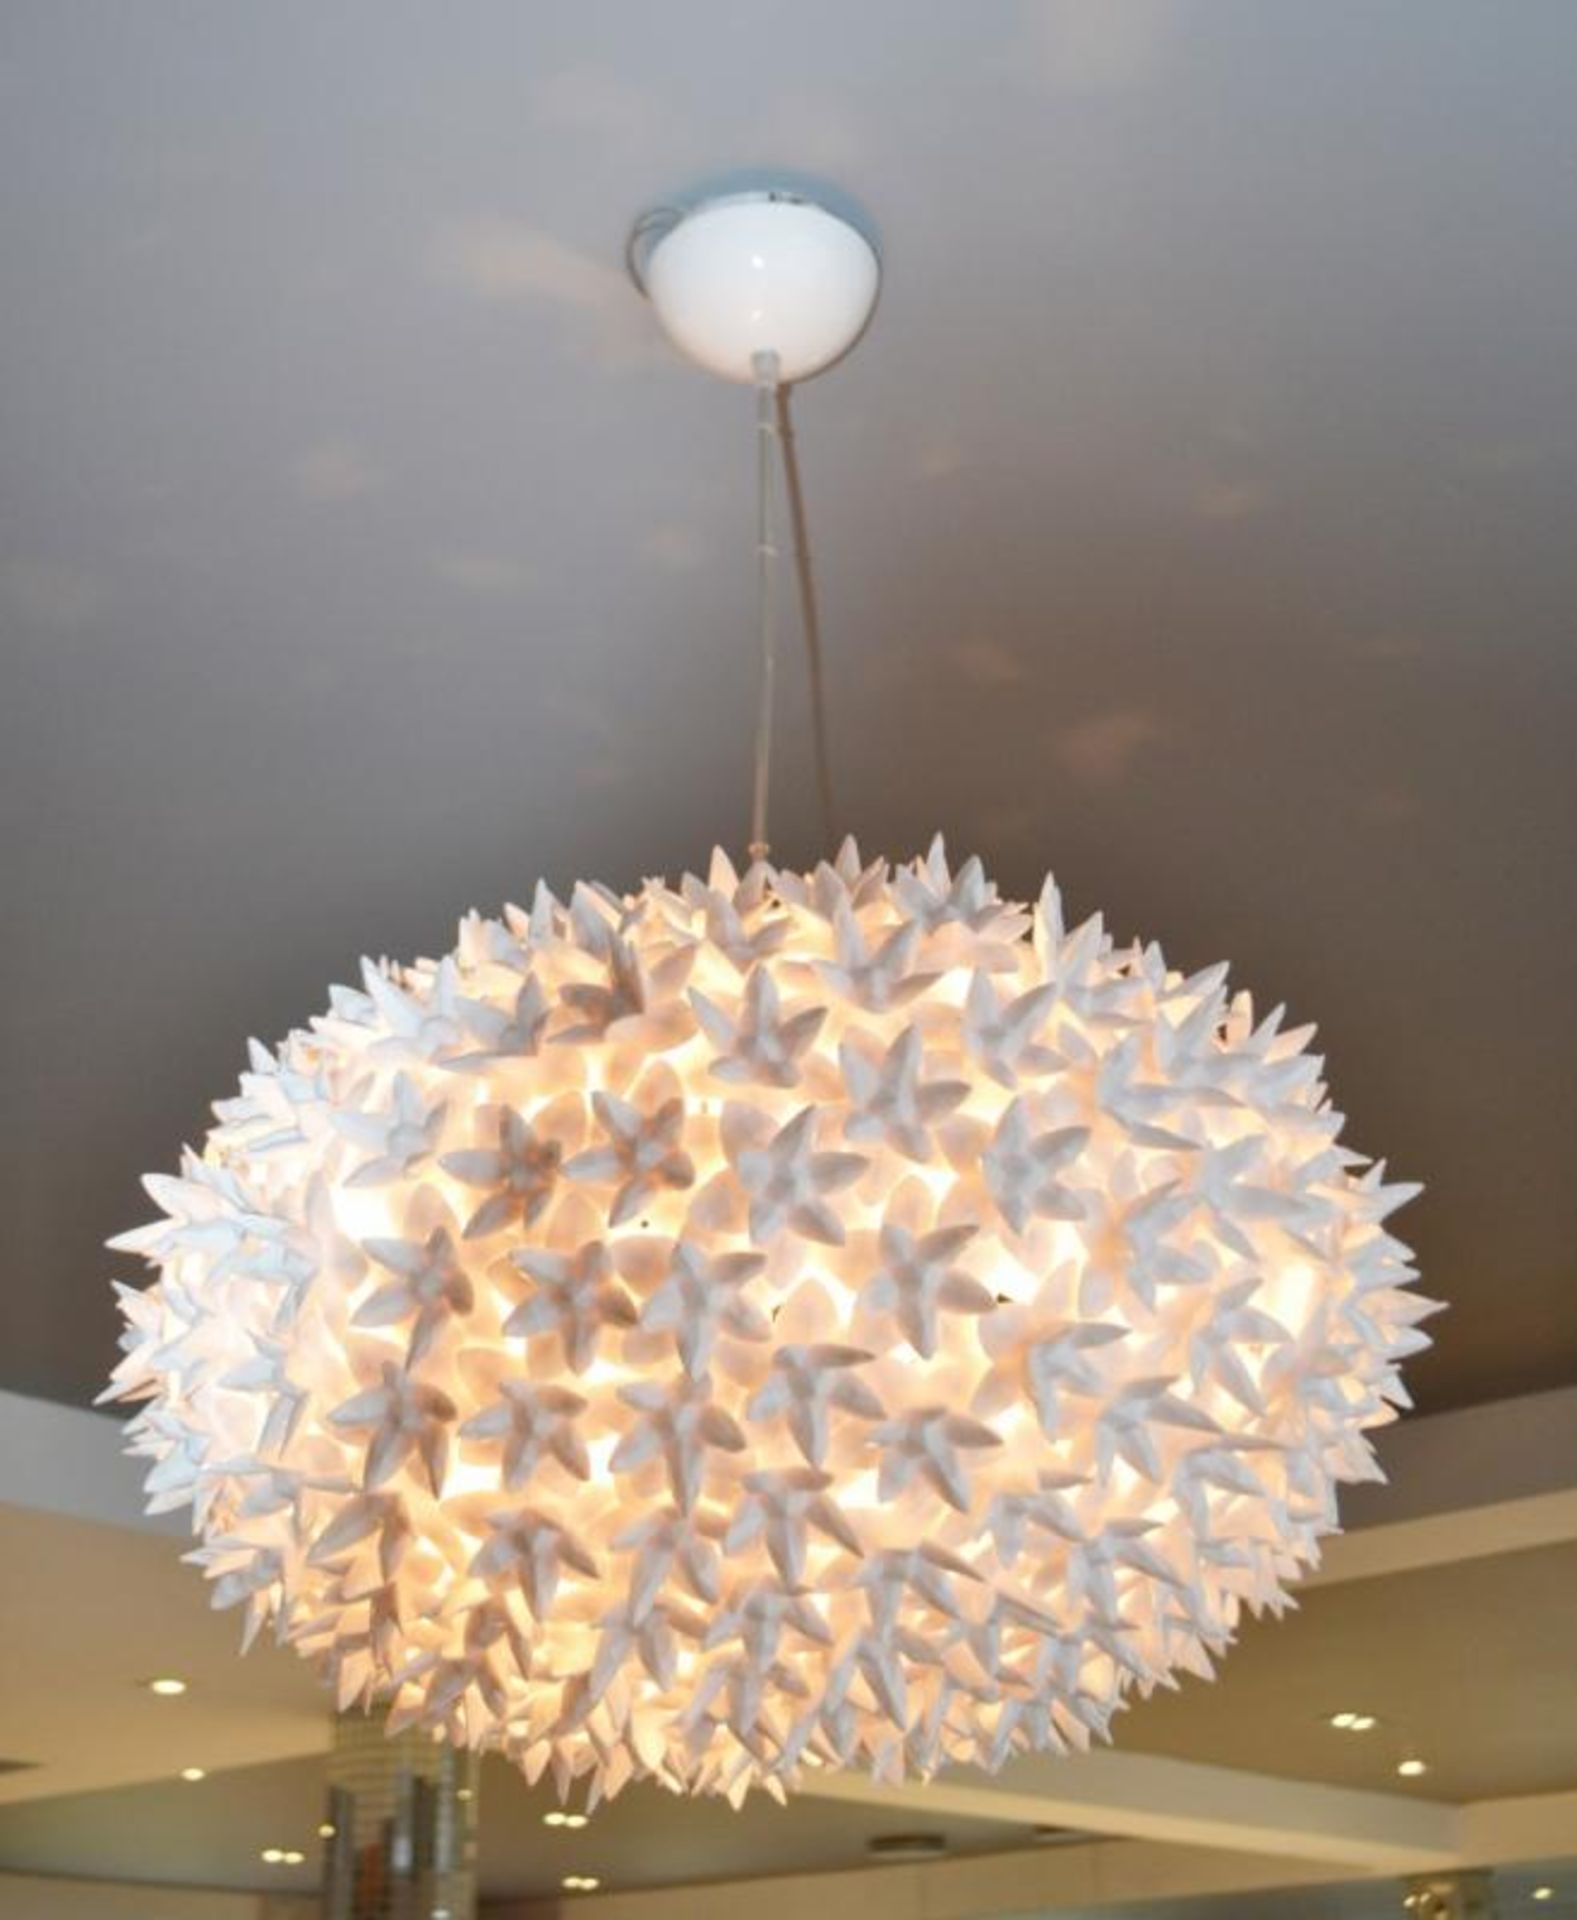 2 x White Pendant Lights With Floral Shapes Finished In White - CL439 - Location: Ilkey LS29 - Used - Image 3 of 4